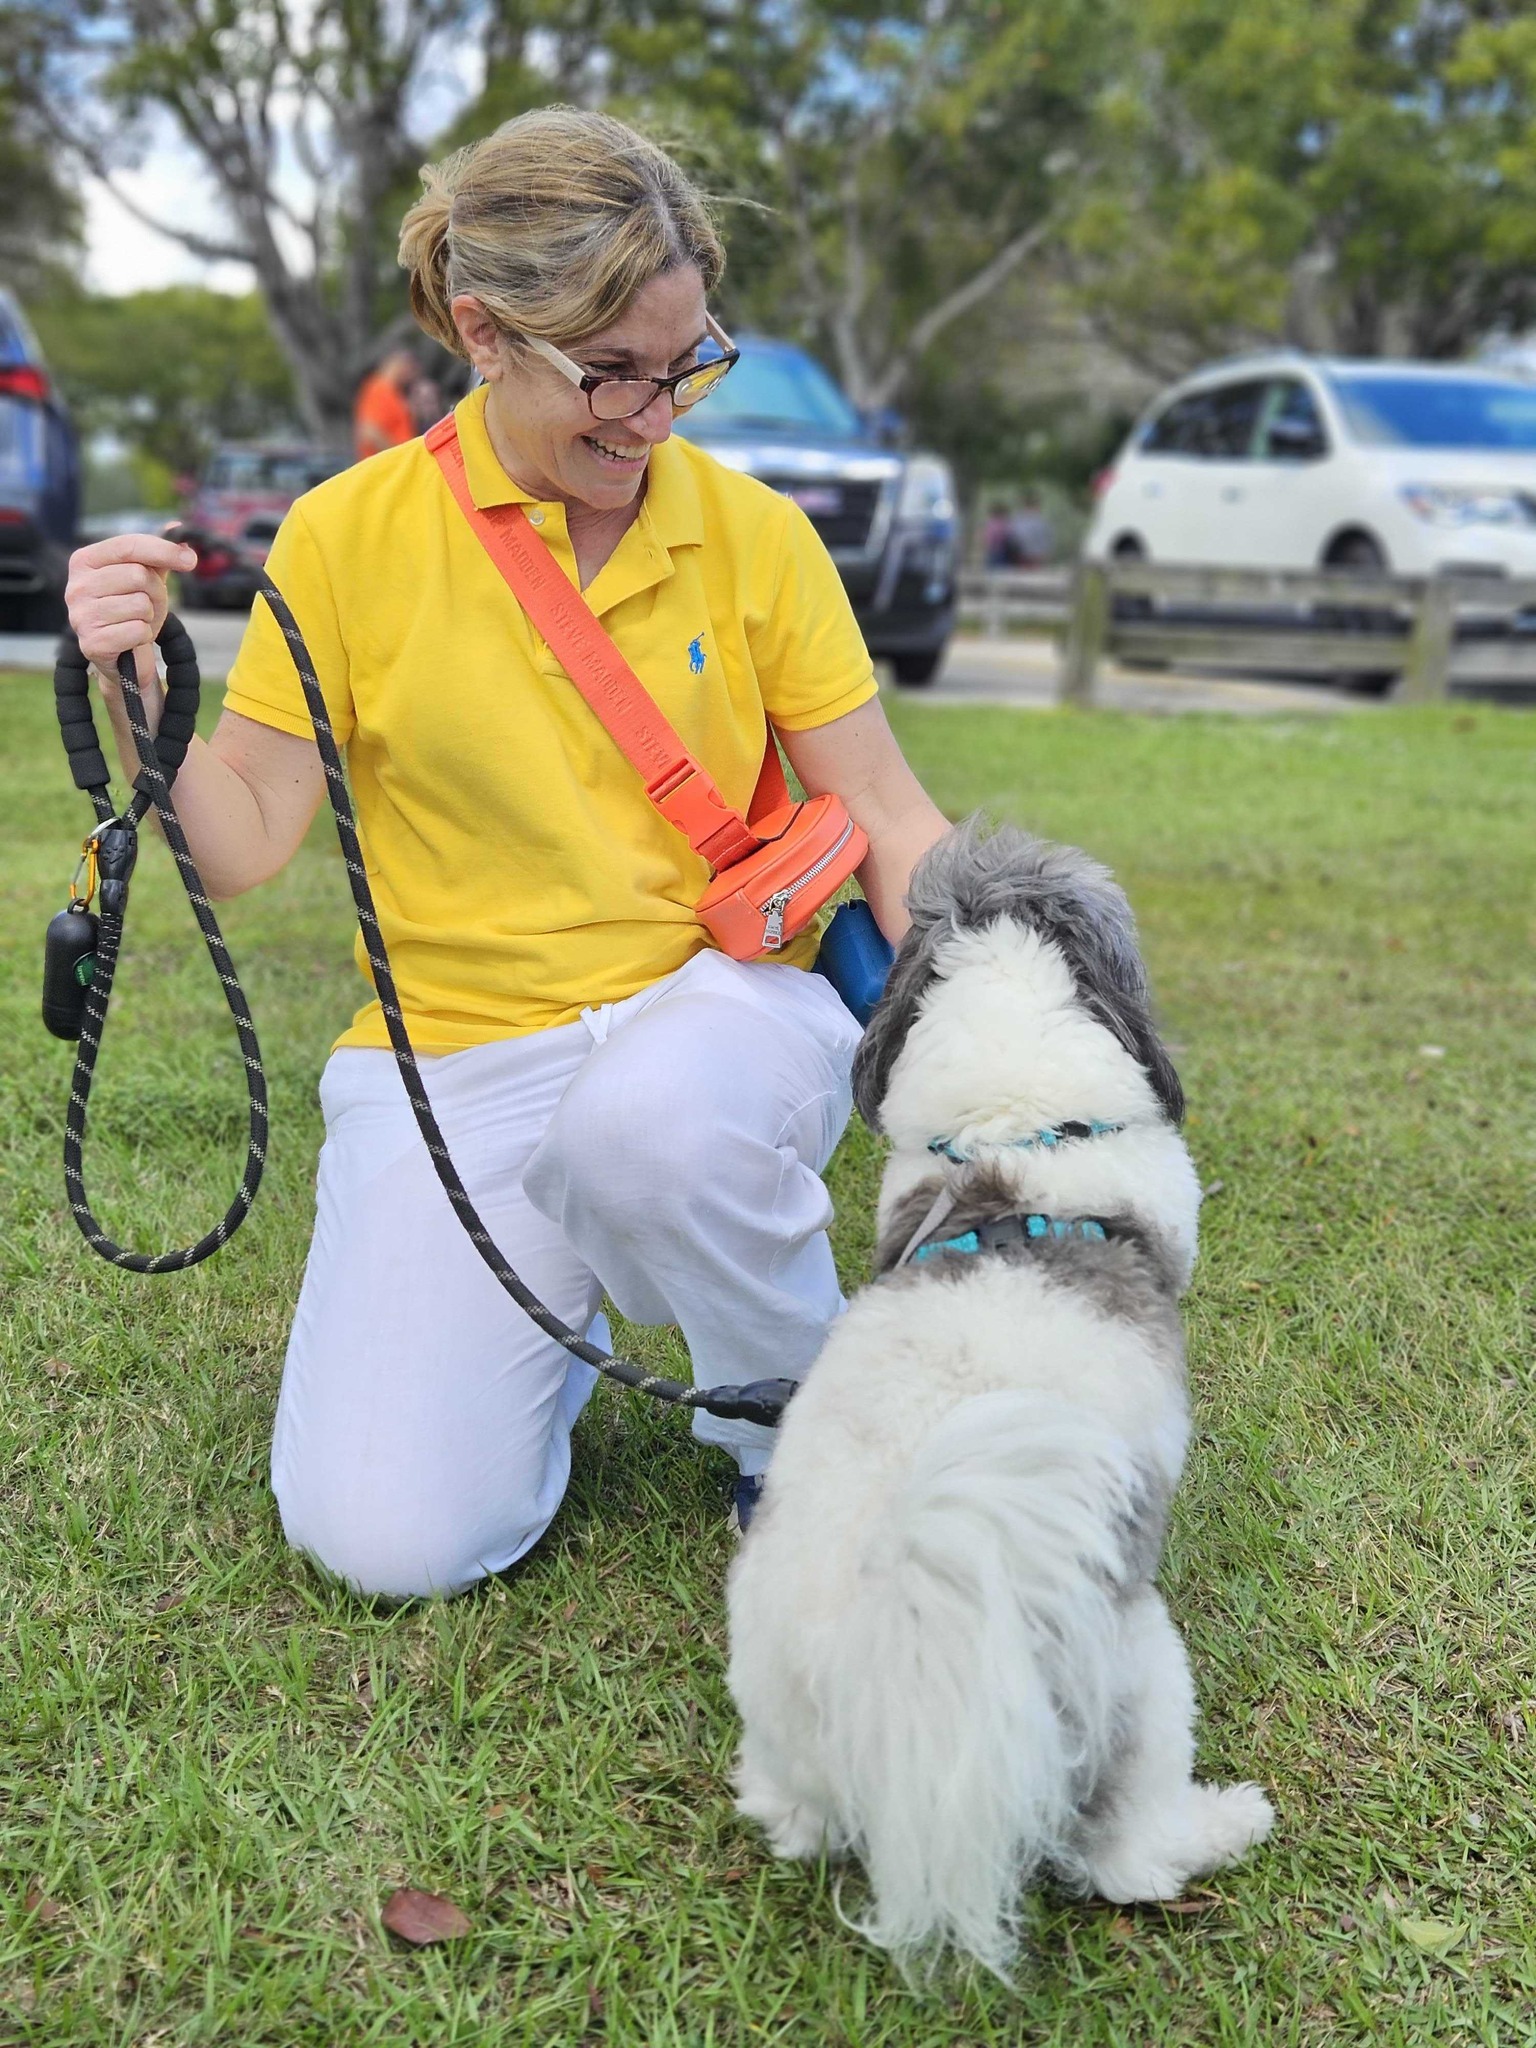 Happy with Dogs Launches Innovative Dog Training Program in Miami